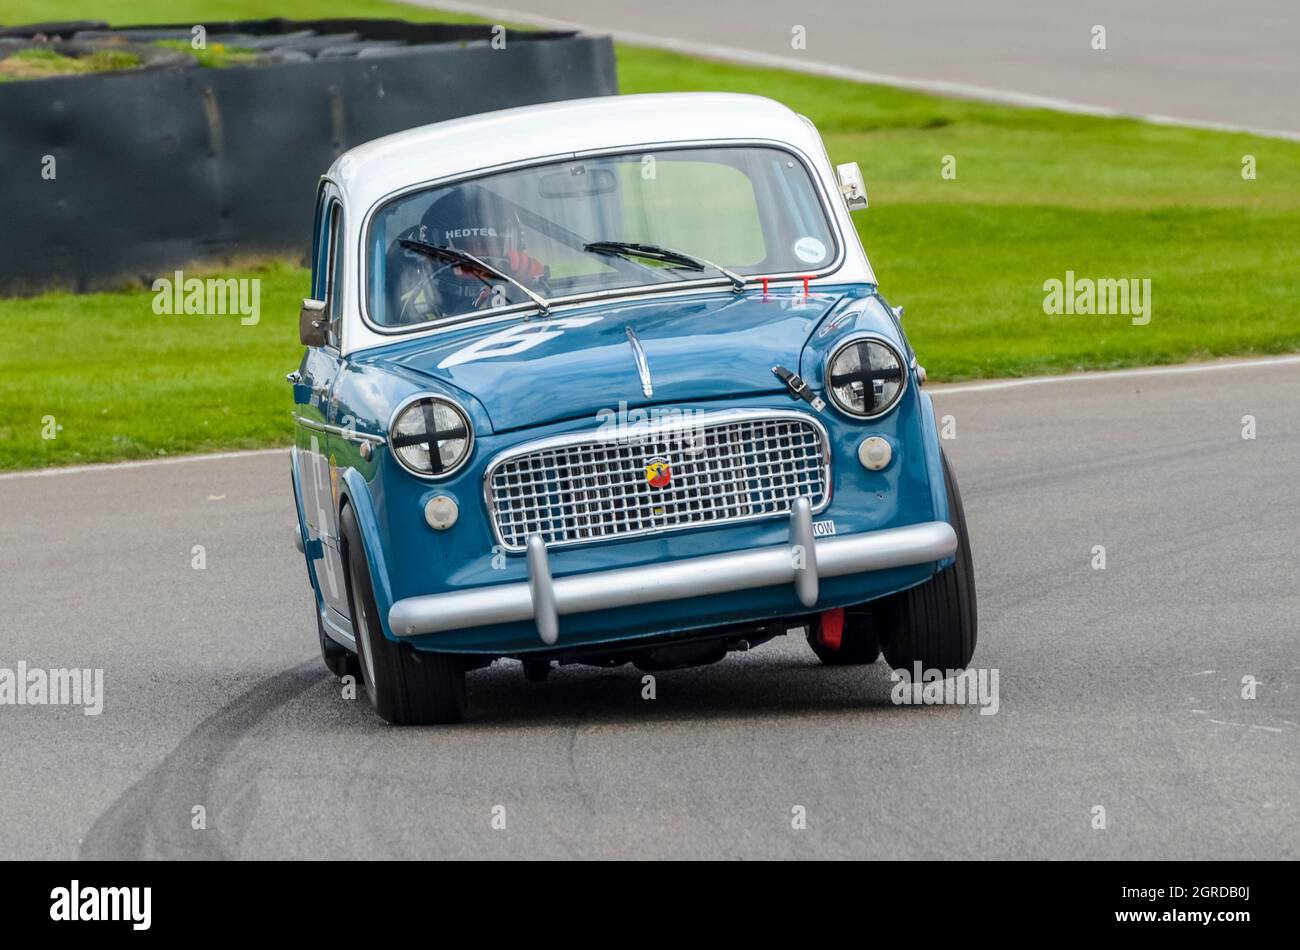 FIAT 1100 classic, vintage race car, racing in the St Mary’s Trophy for 1950s production saloons at the Goodwood Revival 2014. Cornering at speed Stock Photo